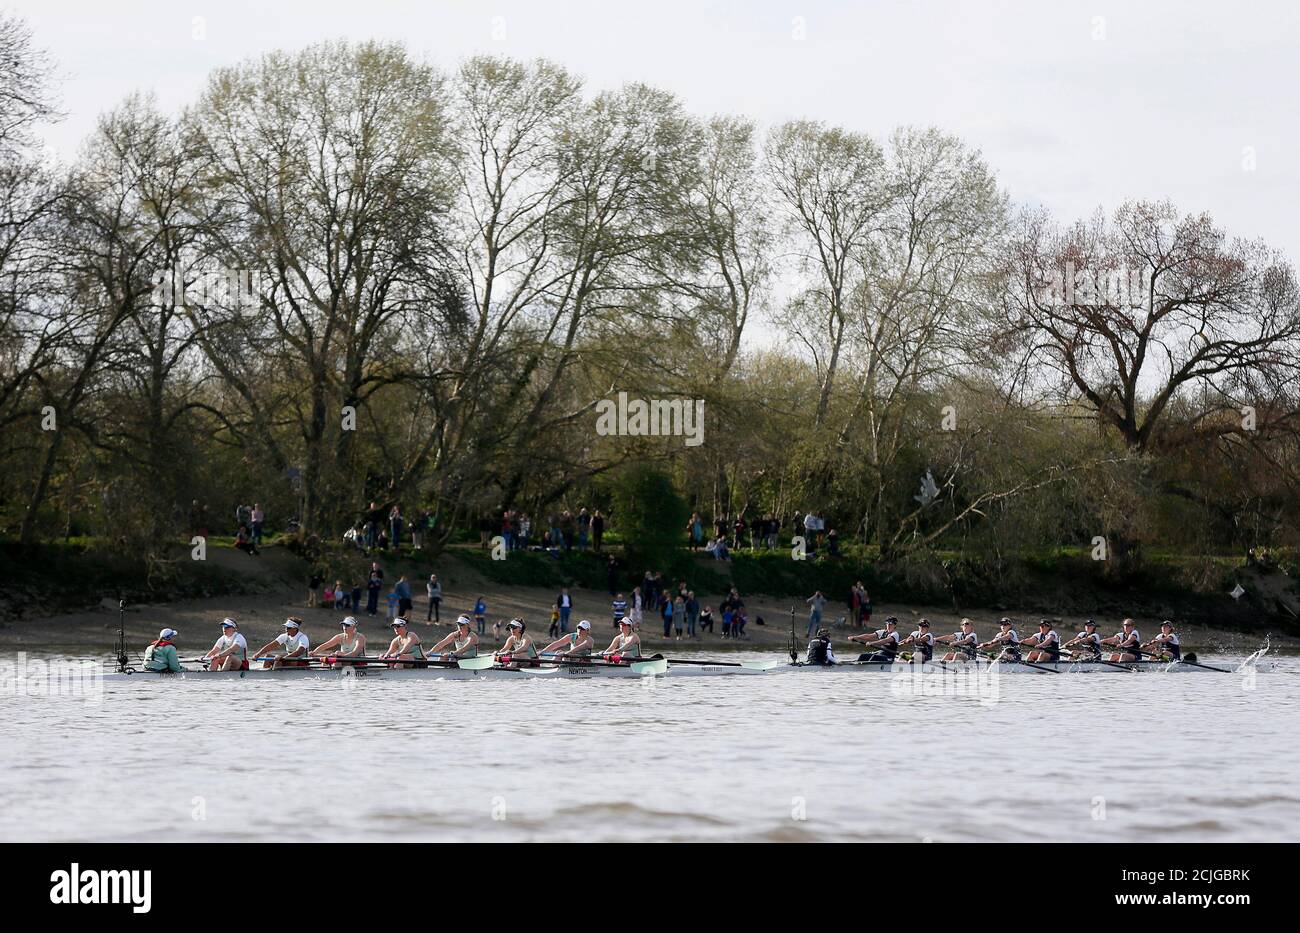 Crews from the women's Oxford (R) and Cambridge universities rowing teams row during the Boat Race on the River Thames in London, April 11, 2015.  Today, for the first time ever, the women and the men raced on the same day over the same course. REUTERS/Stefan Wermuth Stock Photo